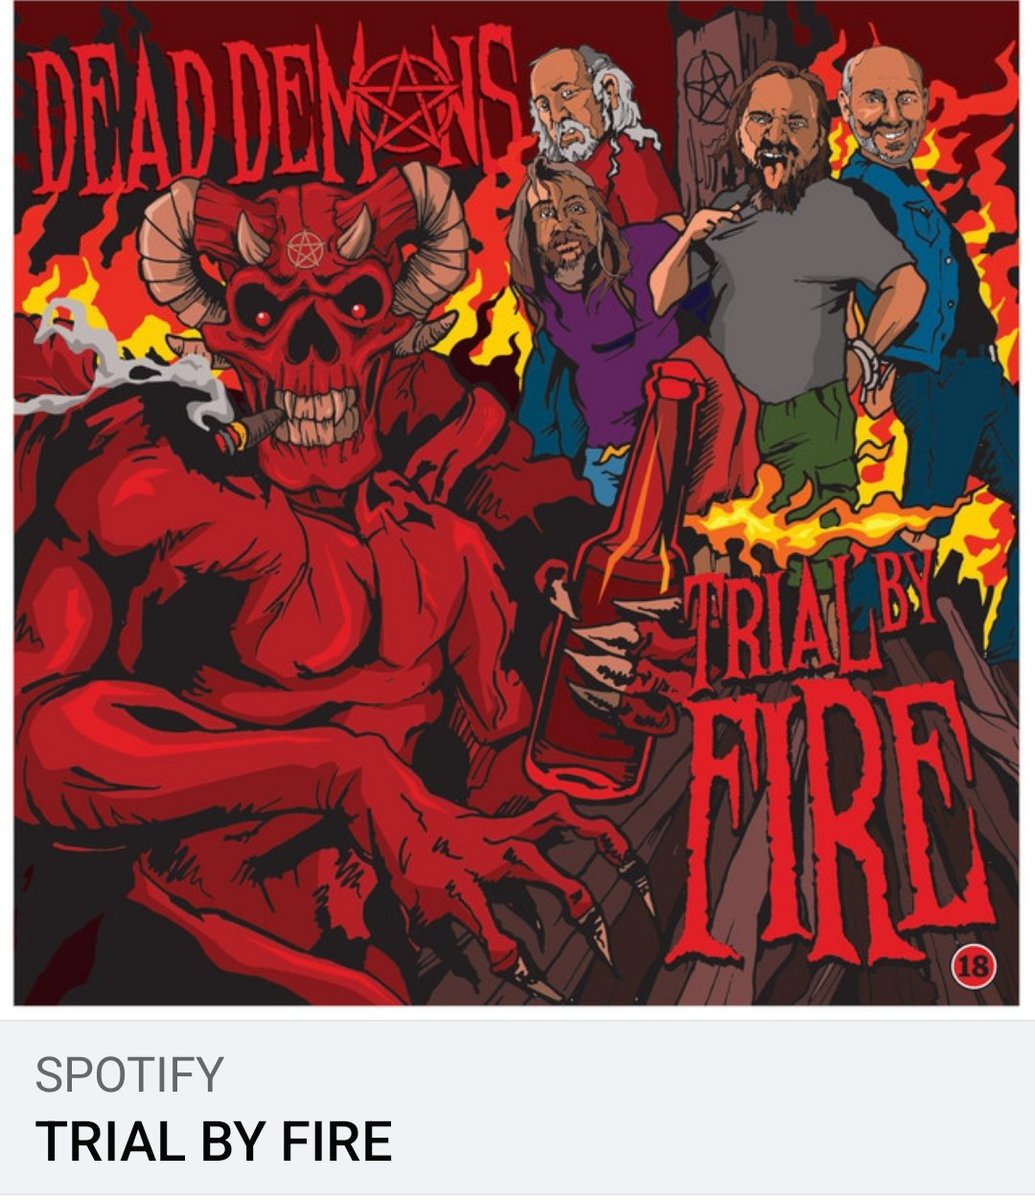 📢 ANNOUNCEMENT 📢
Dead Demons Trial By Fire 🔥  is RELEASED ‼️
                      ⬇️⬇️
Spotify #Spotify #amazon
#iTunes #planetrock #PlanetRockRadio #NWOTHM #nwobhm #heavymetal #rockmusic #hardrock #newmusic #newrelease #EP #deaddemons2020 #trialbyfire